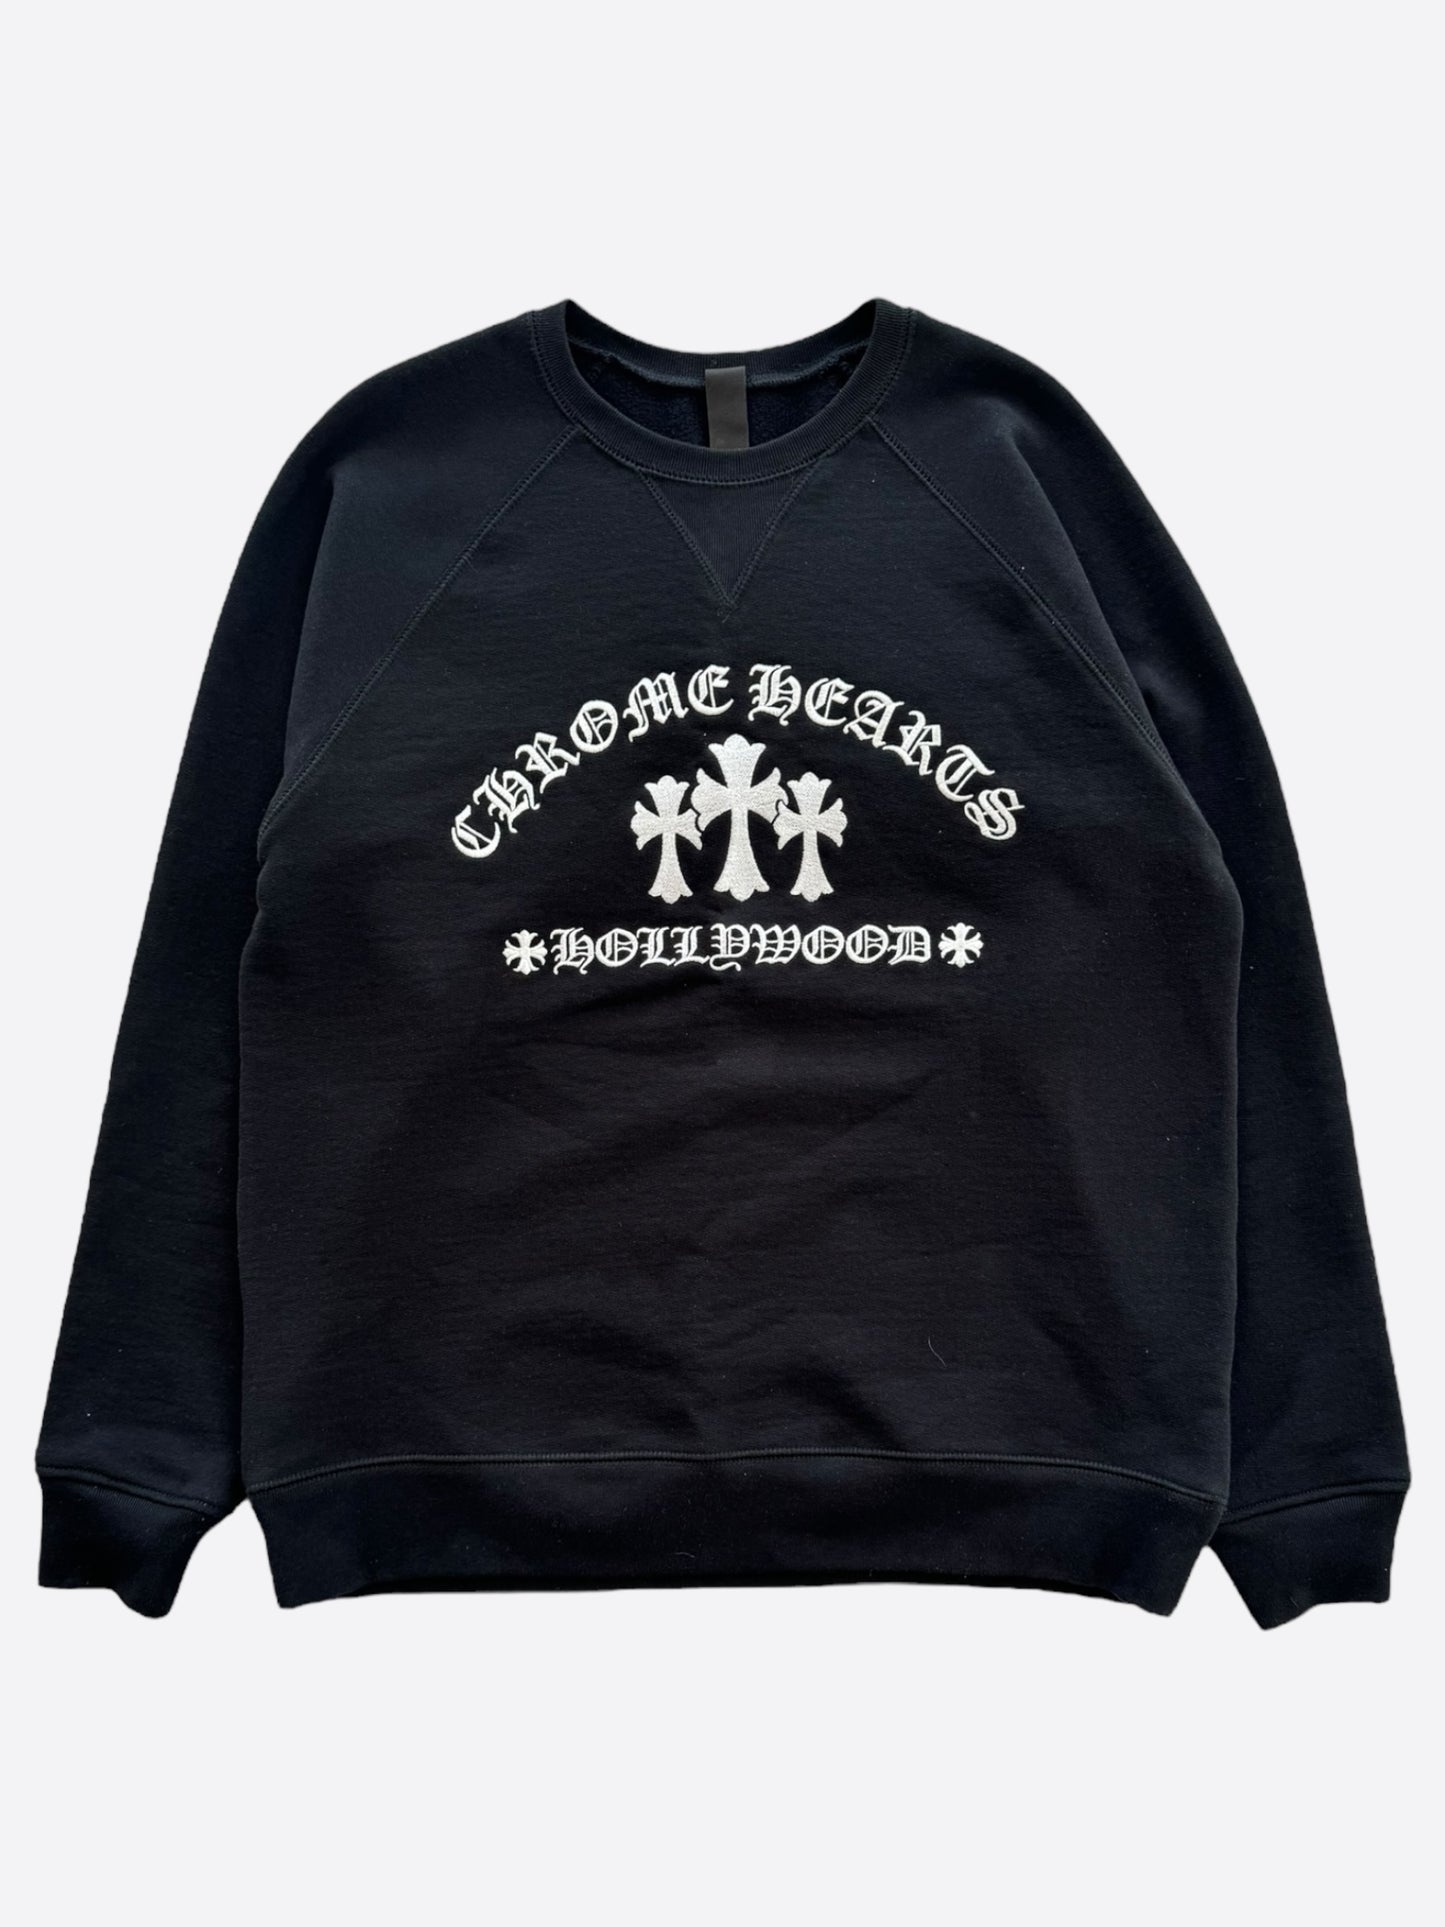 Chrome Hearts Black & White Triple Cross Embroidered Sweater